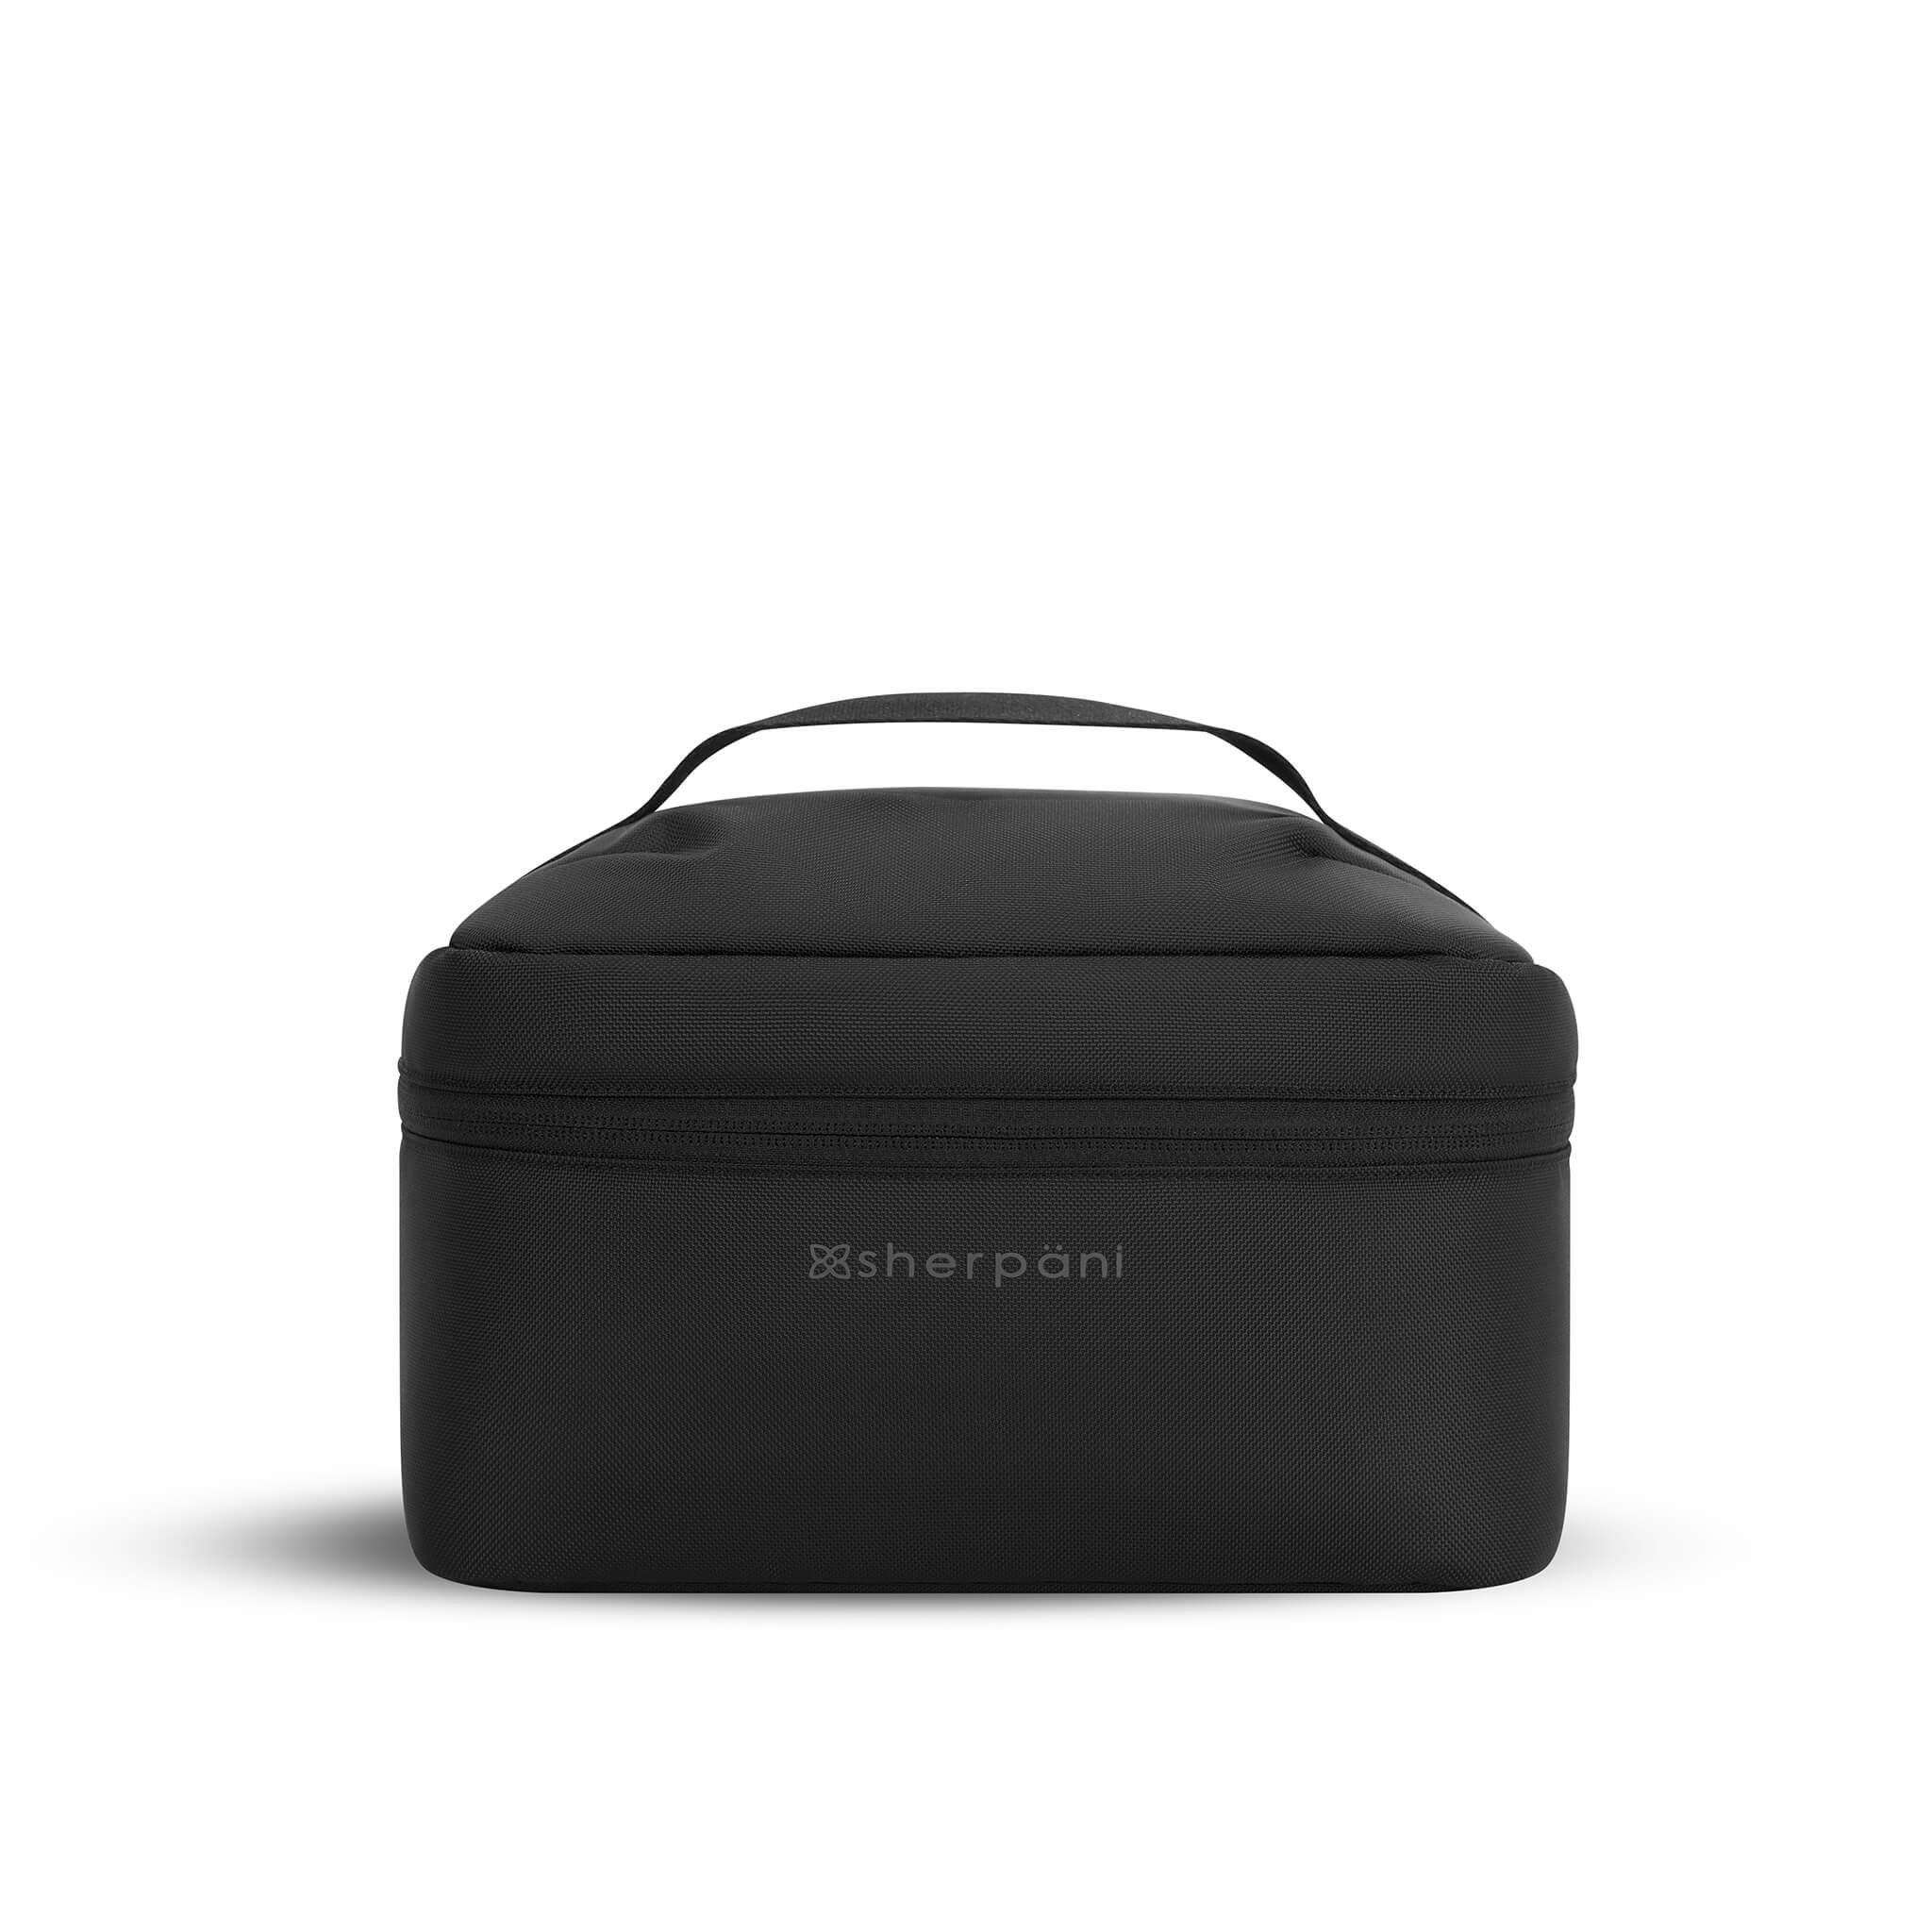 Flat front view of Sherpani travel accessory the Savannah in Carbon. The Savannah is a travel cosmetics case.